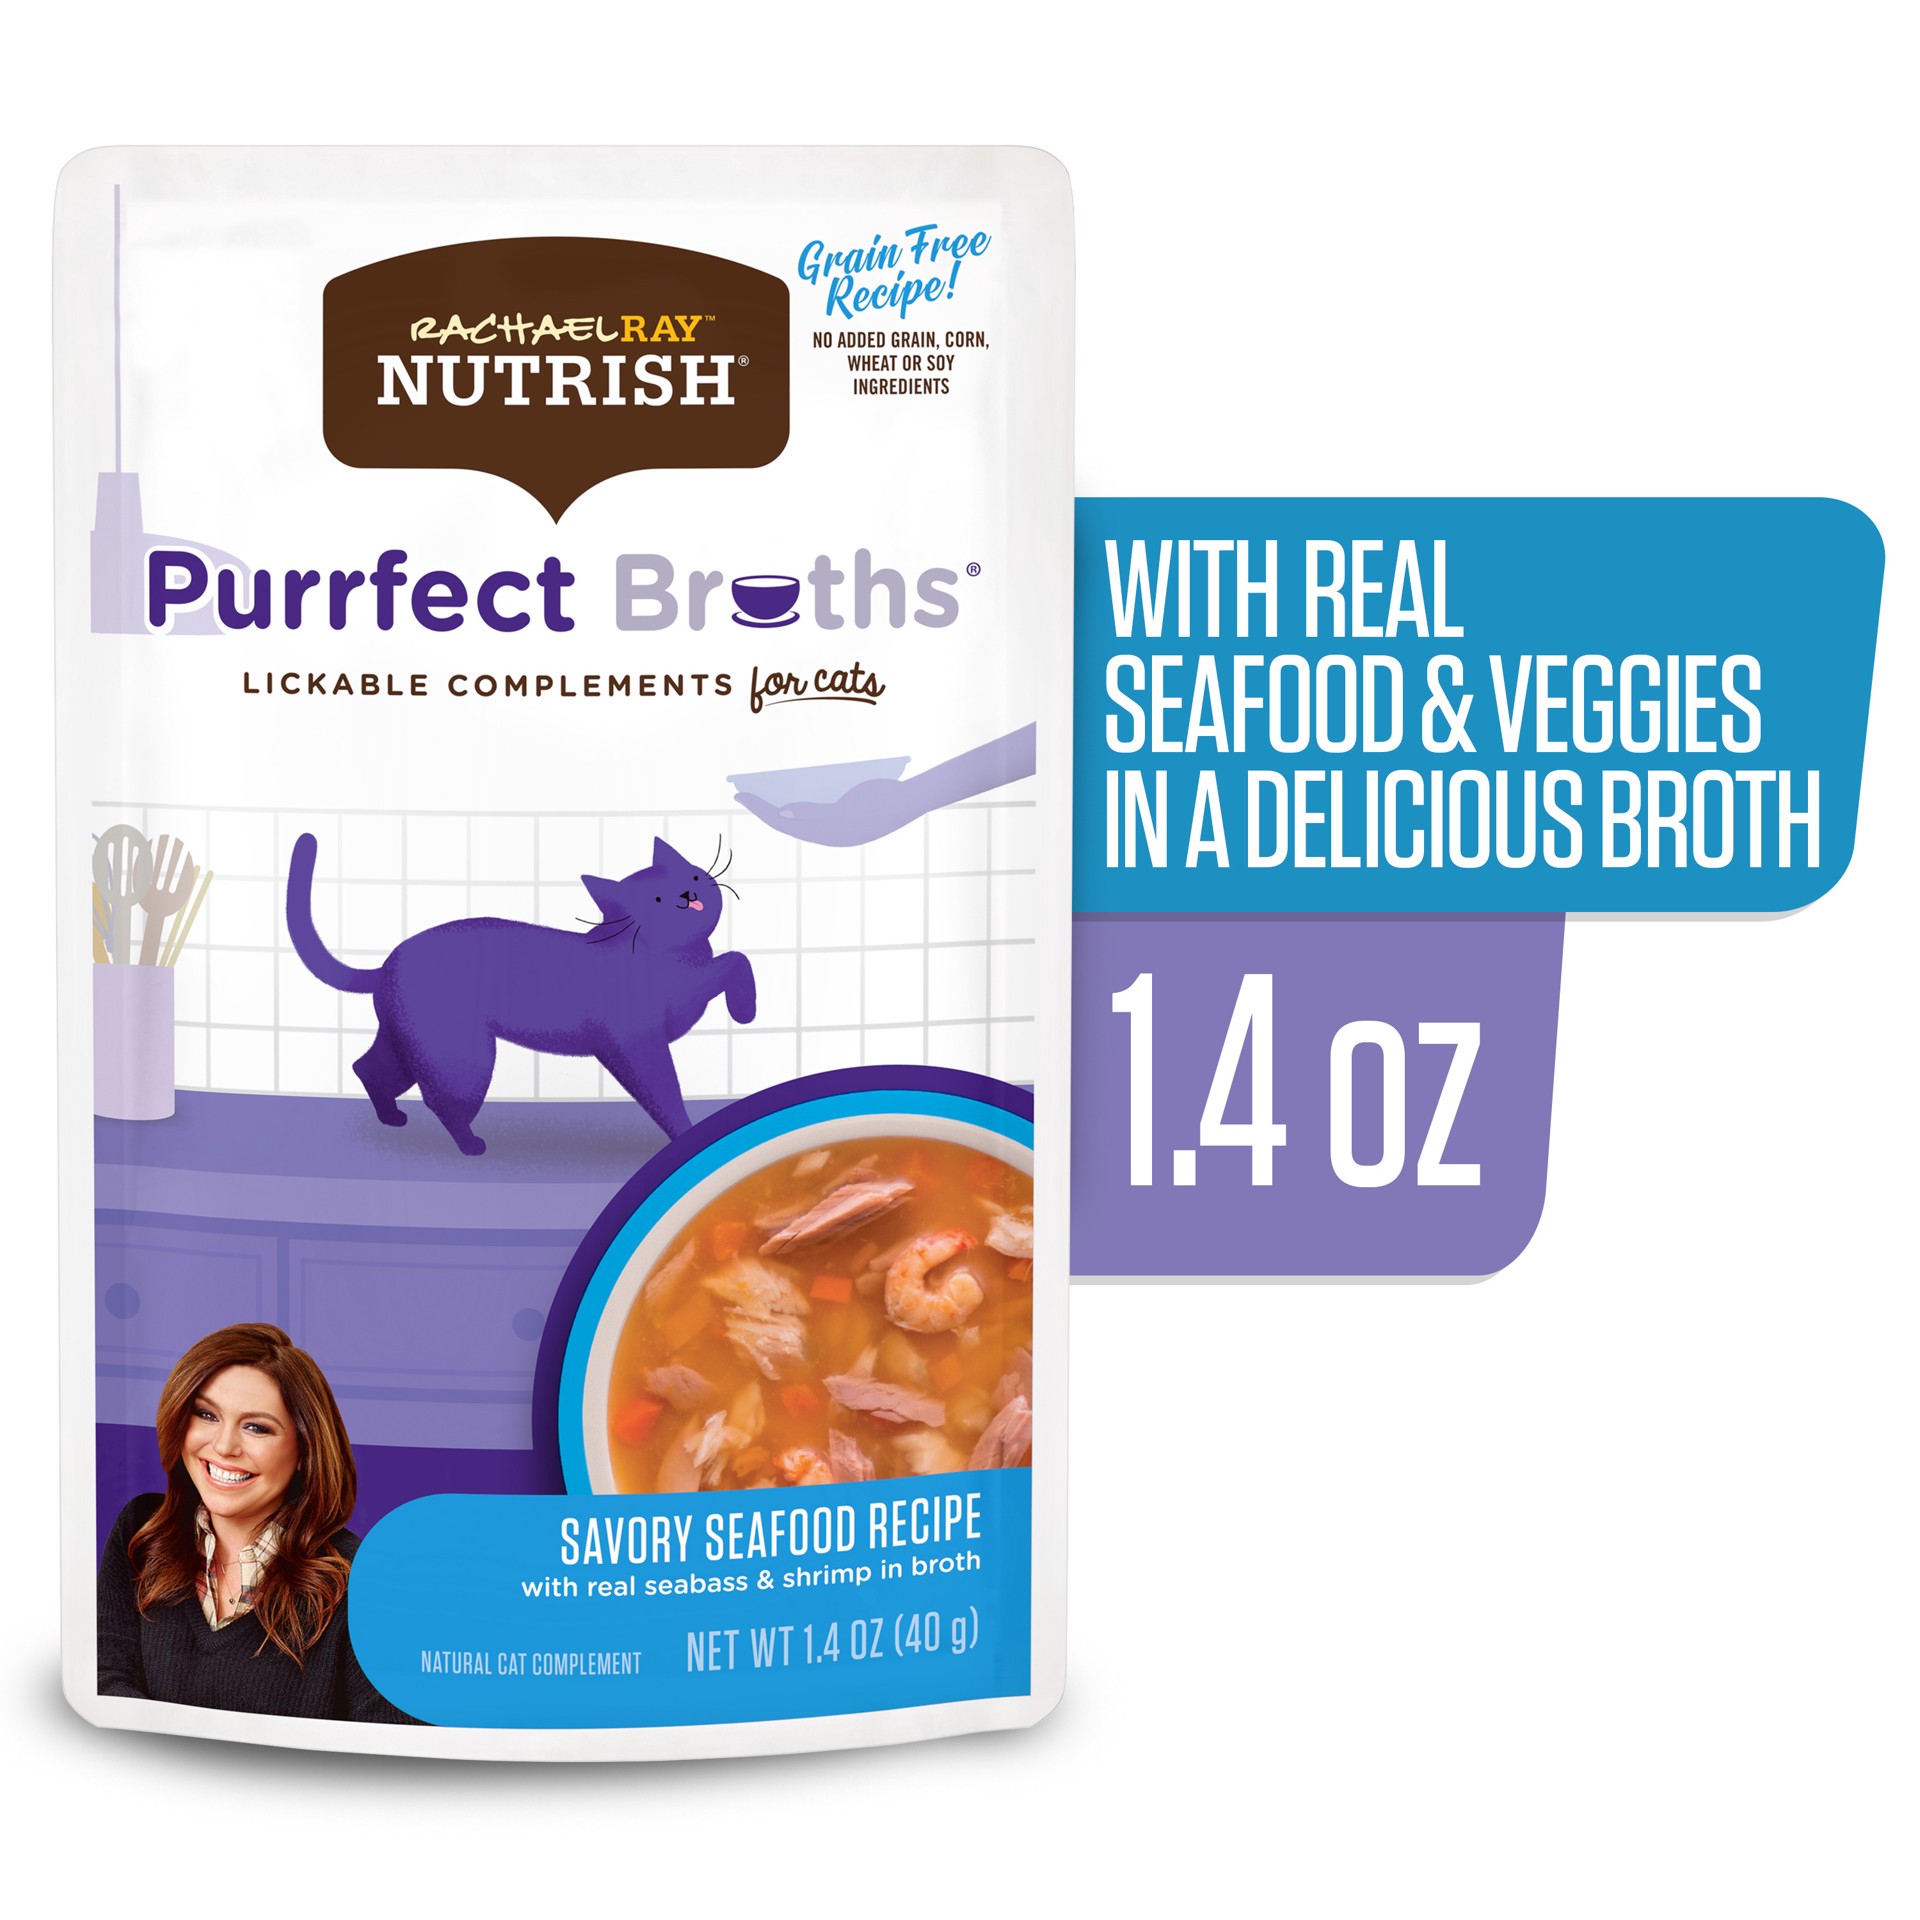 slide 3 of 6, Rachael Ray Nutrish Purrfect Broths Lickable Cat Treats and Meal Complements, Savory Seafood Recipe, 1.4 Ounce Pouch, 1.4 oz